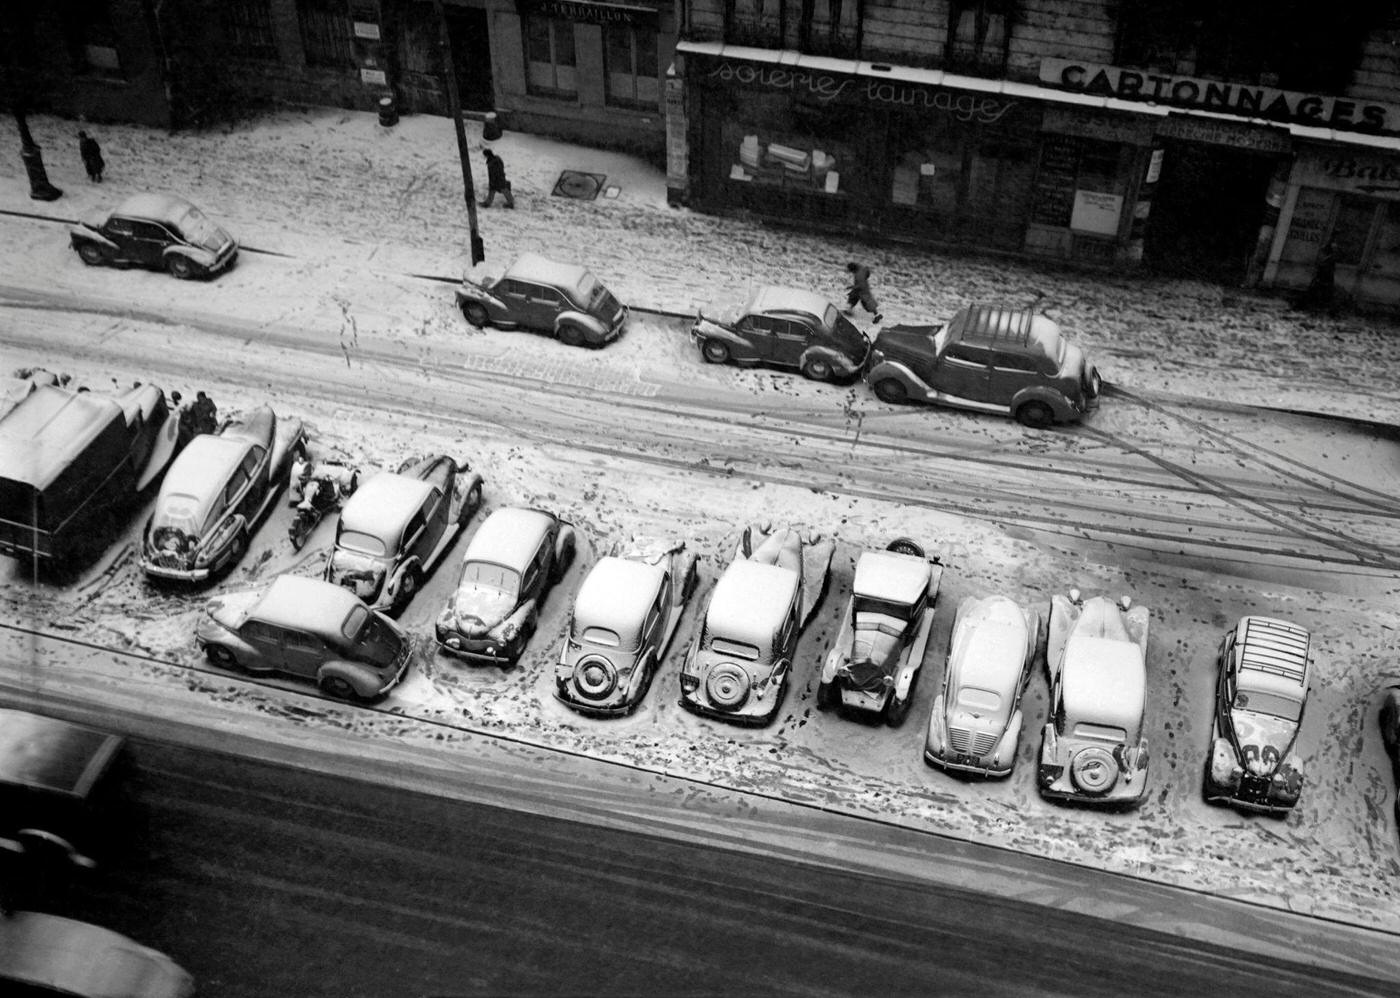 A Man Walking By Cars Covered In Snow In A Street Of Paris, In The 1950s.